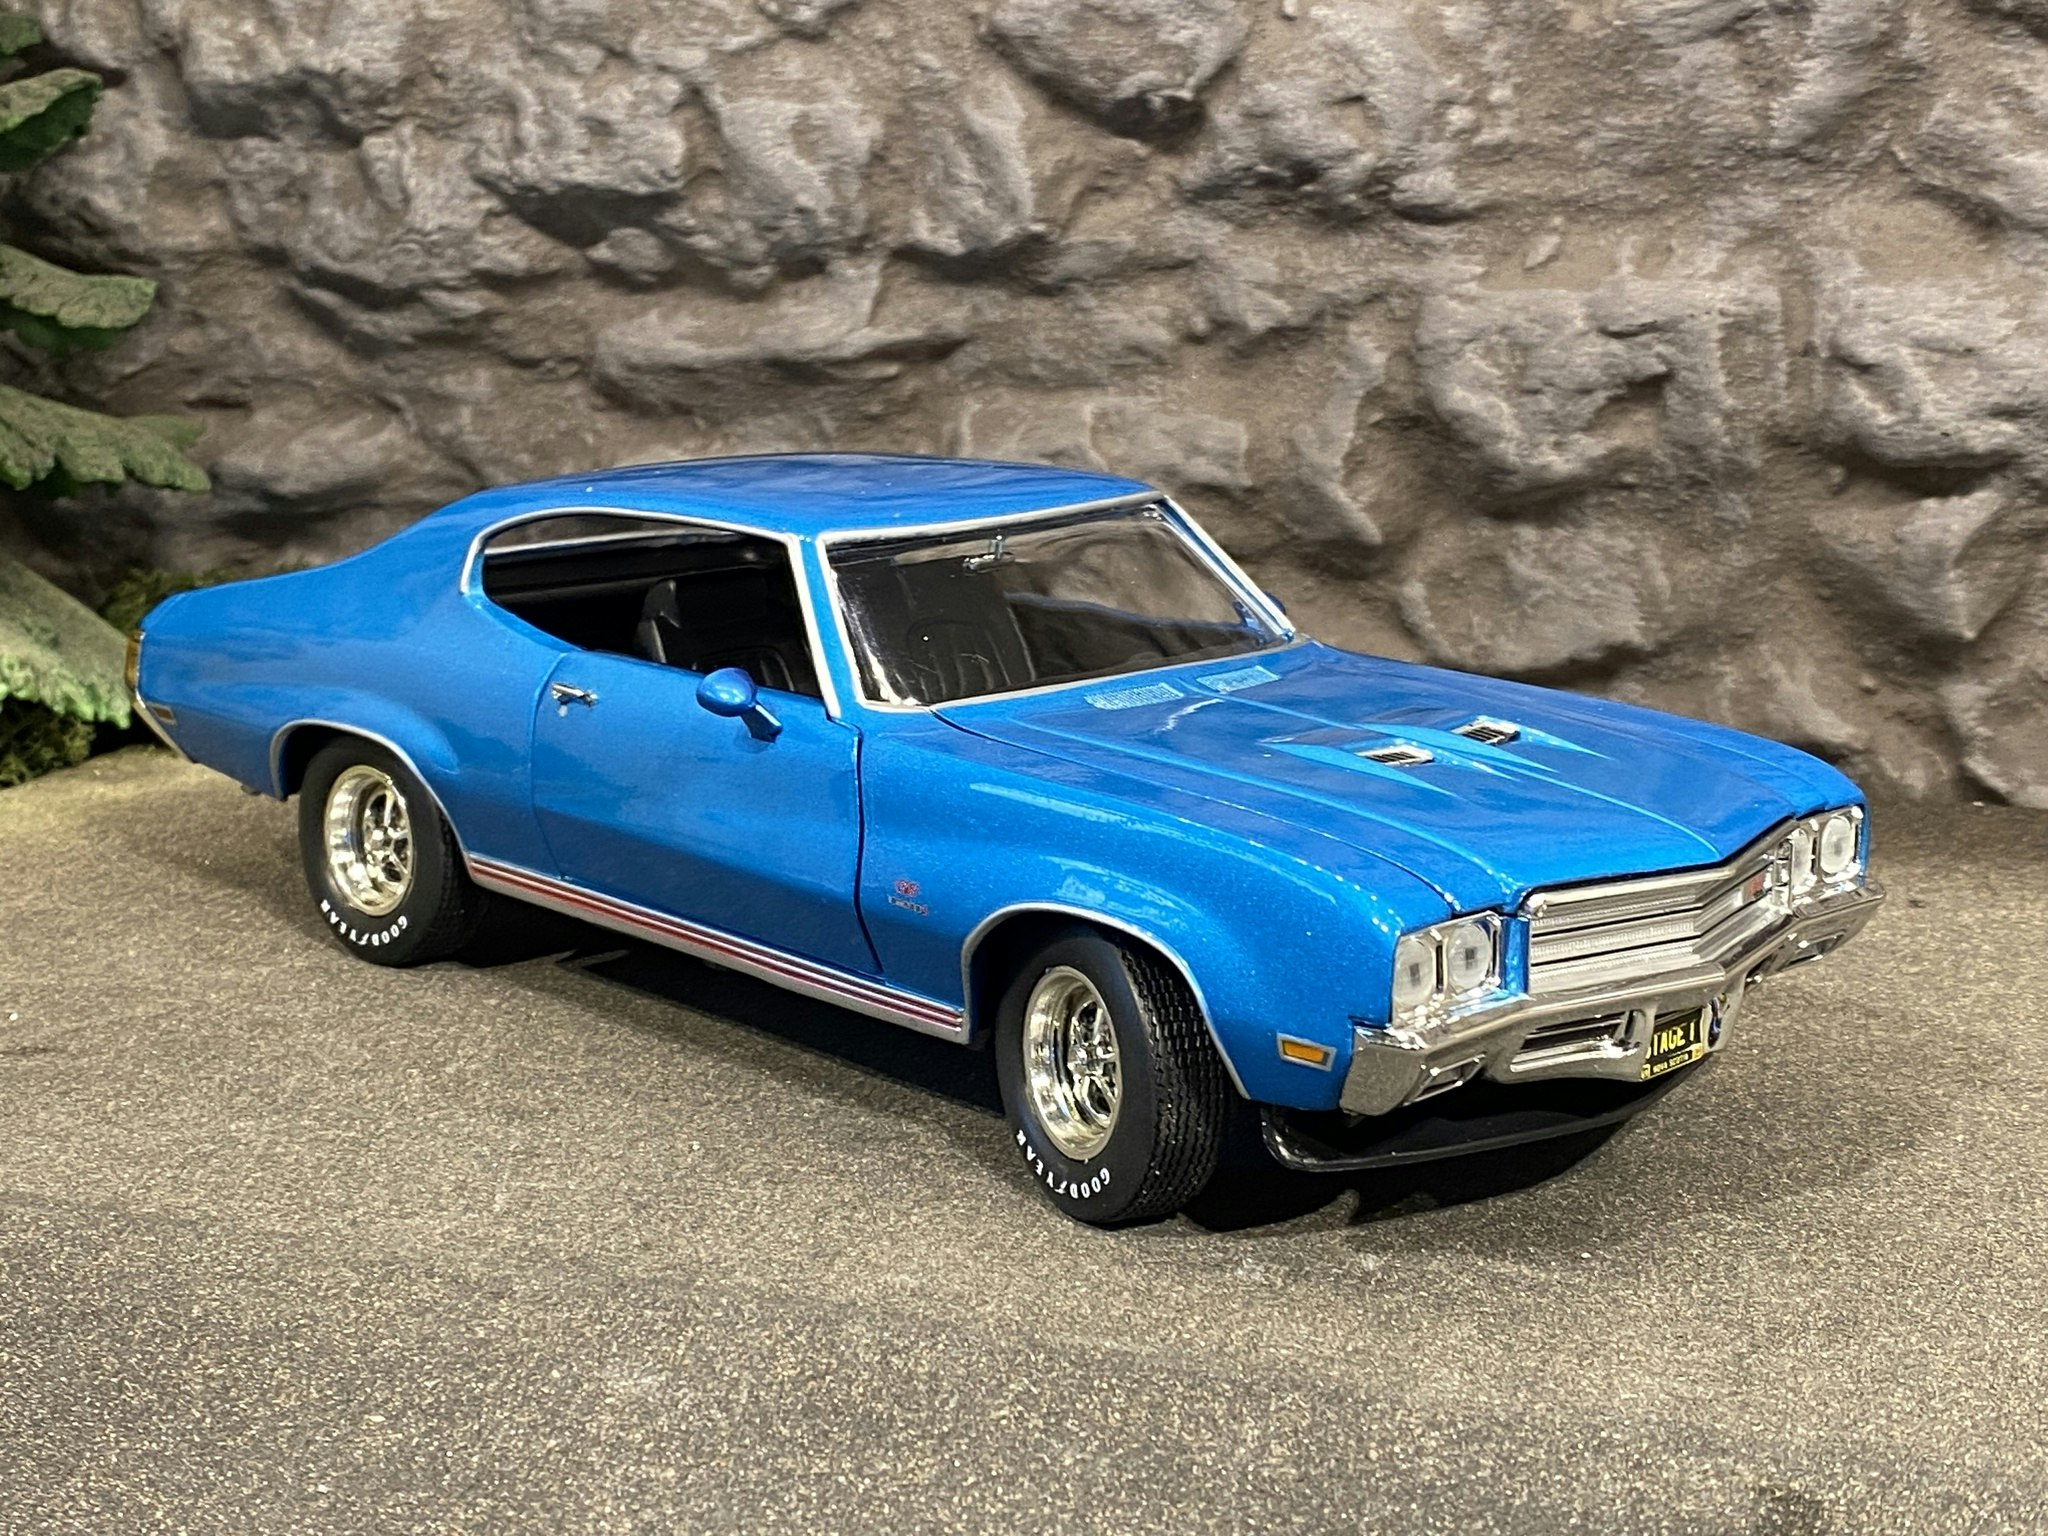 Skala 1/18 Buick GS Stage 1, 1971' fr Auto world "American Muscle"